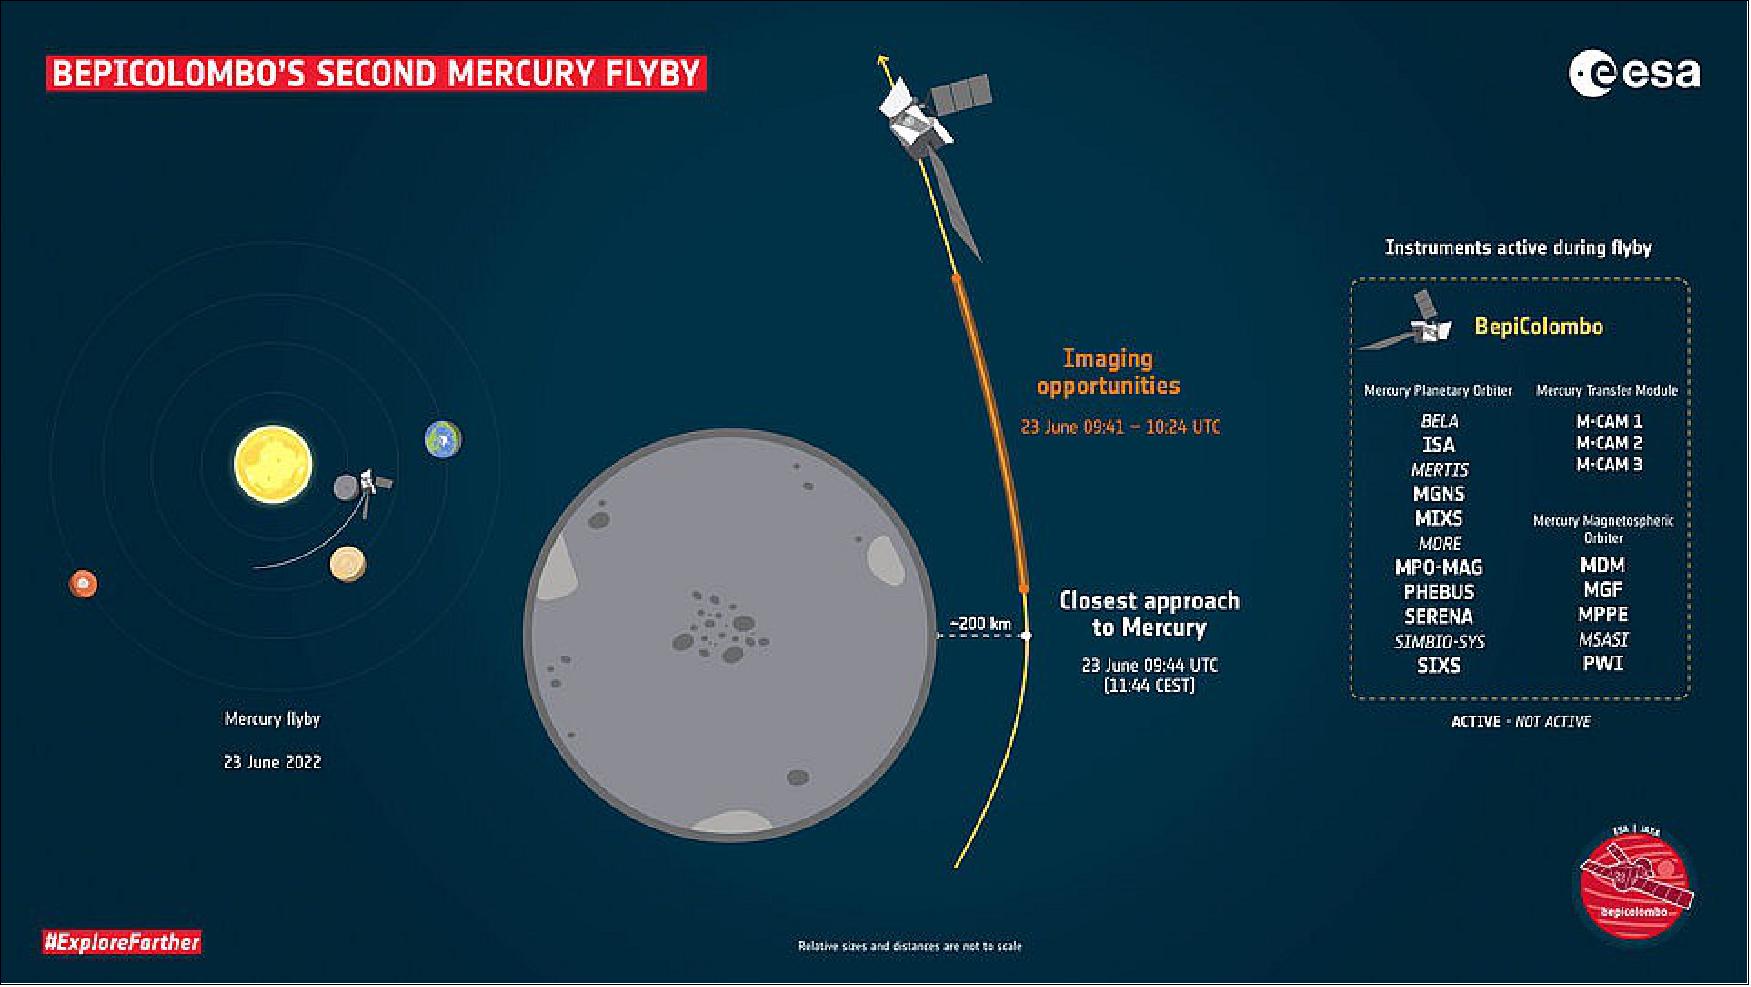 Figure 20: Key moments during BepiColombo's second Mercury flyby on 23 June 2022. The spacecraft will skim the surface at an altitude of about 200 km at its closest approach, at 09:44 UTC (11:44 CEST). - Many of the in situ instruments will be on and collecting data as usual, and BepiColombo's three monitoring cameras will also be activated. The images will be downlinked during the afternoon of 23 June and released over the following days. - Not to scale: the relative sizes of planets and spacecraft, and the attitude of the spacecraft is not representative (image credit: ESA)